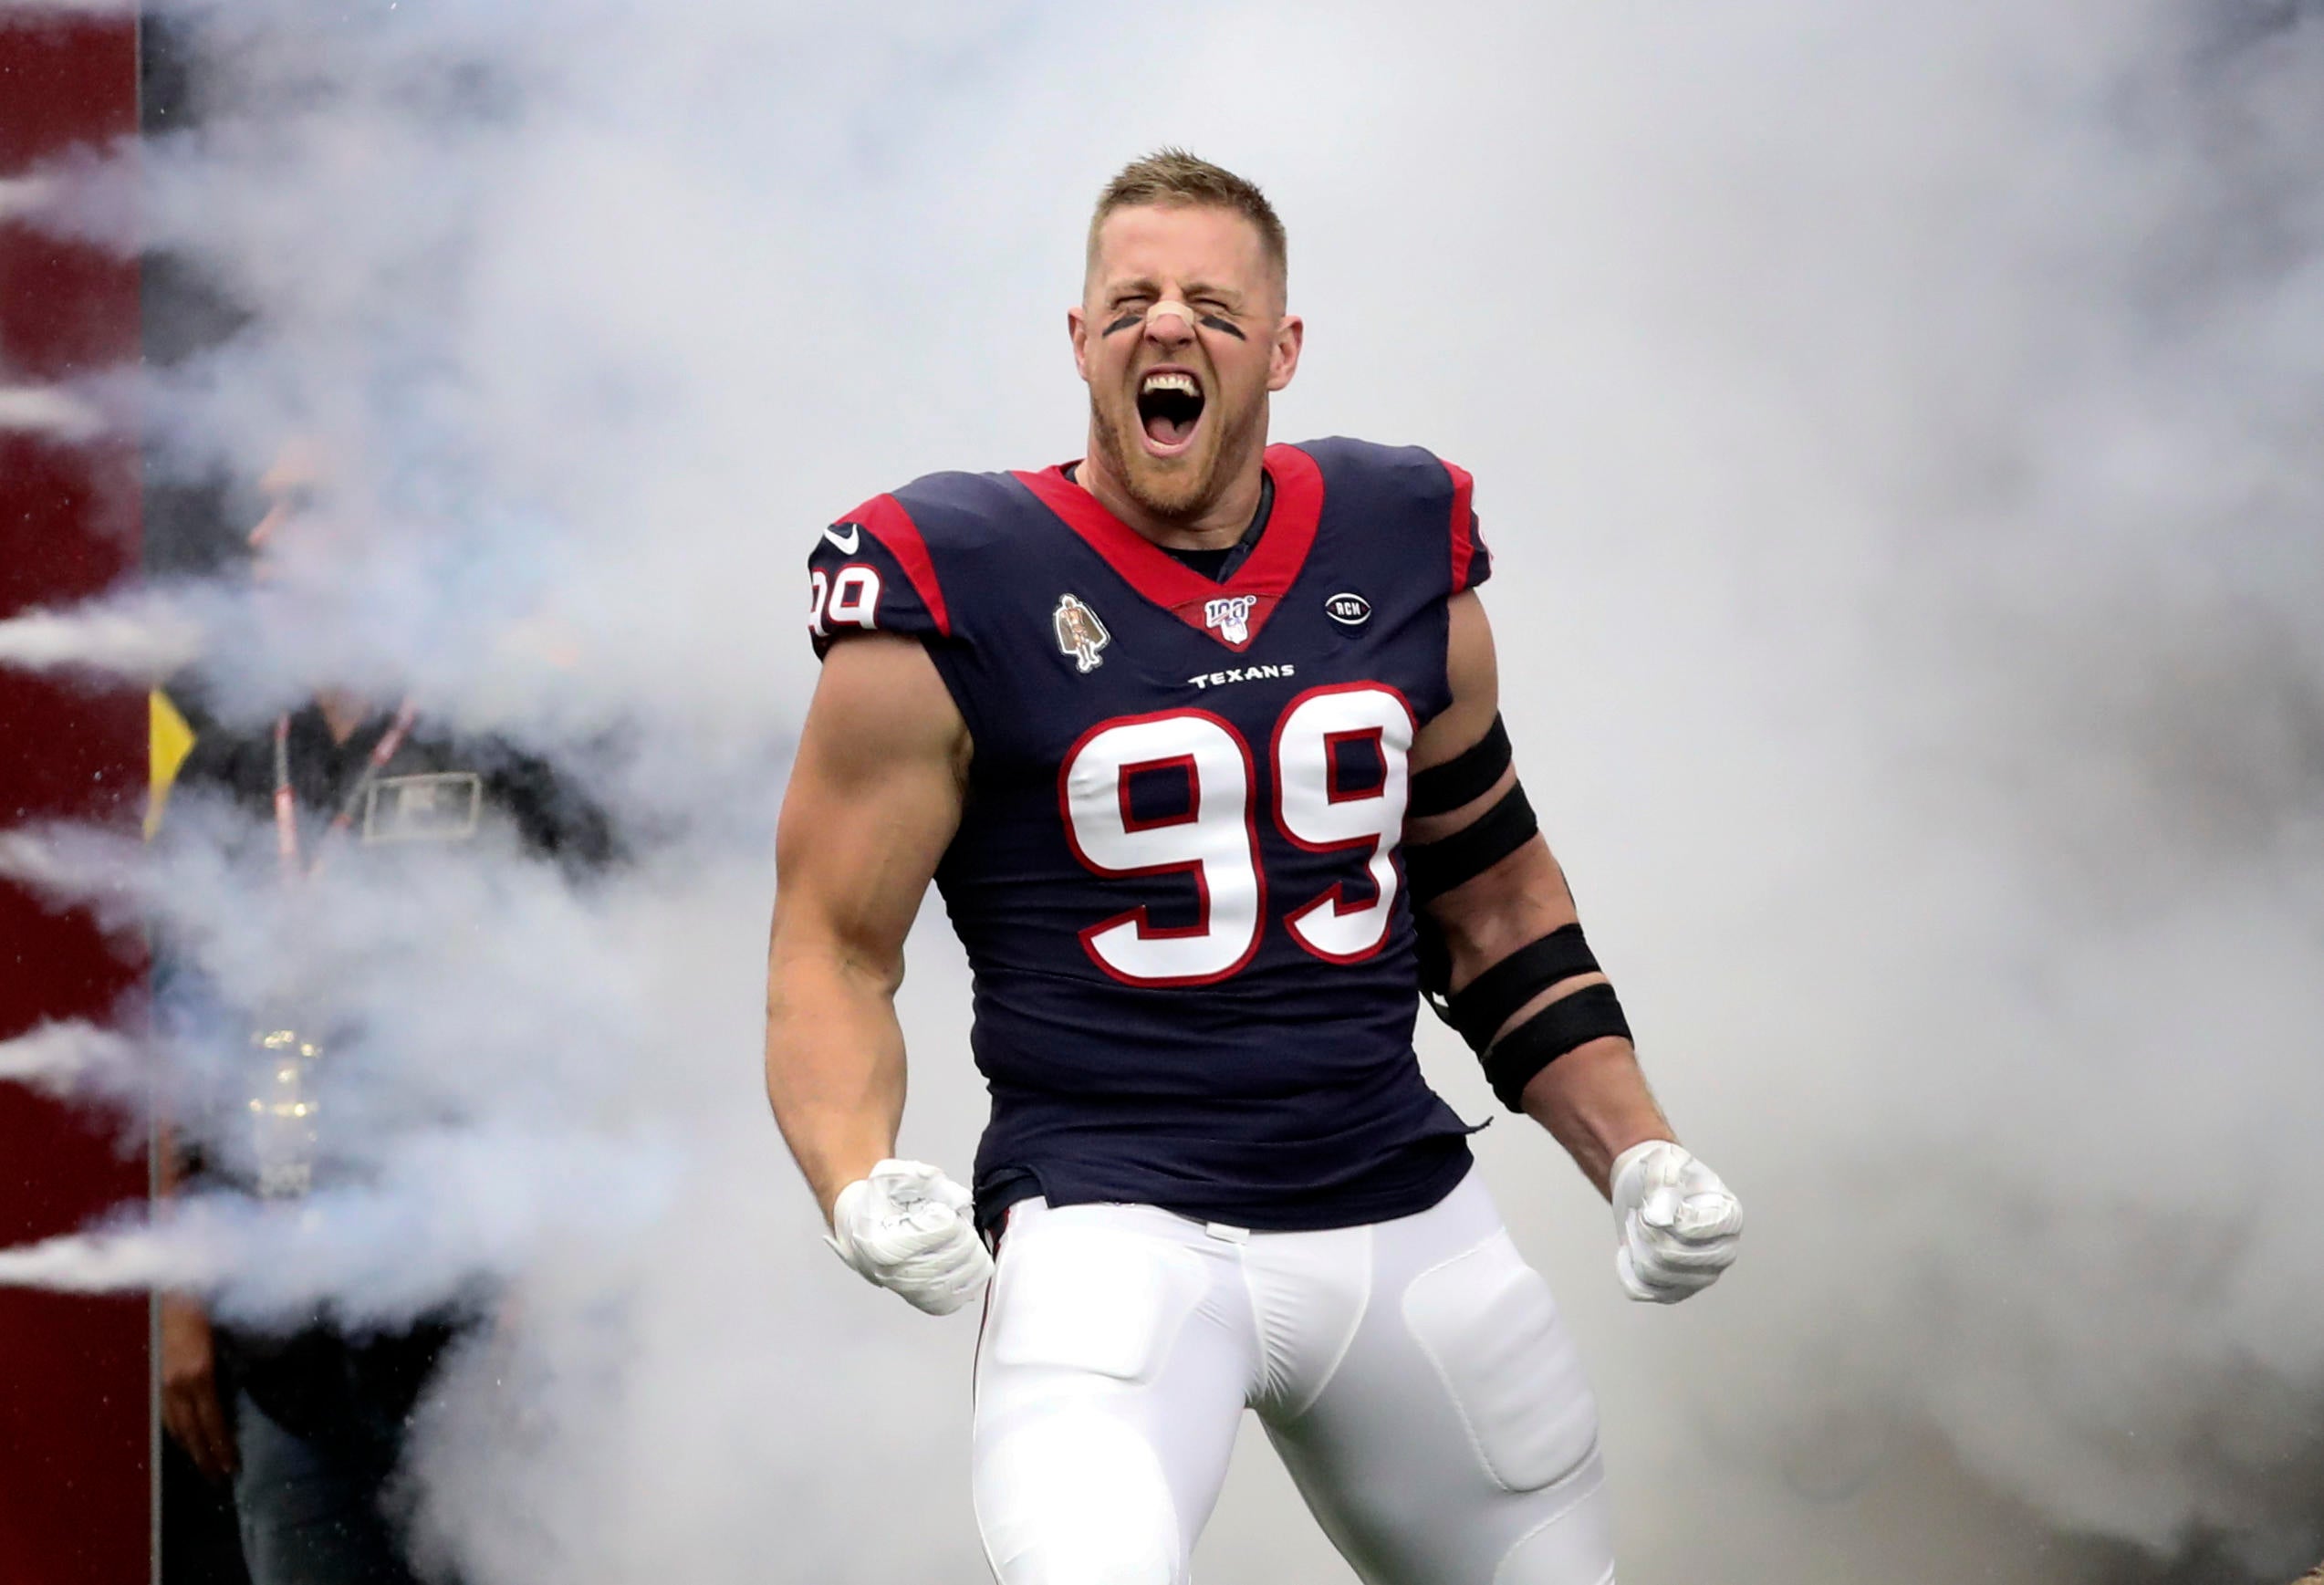 J.J. Watt to be inducted into Texans' Ring of Honor; third member in franchise history to join elite group